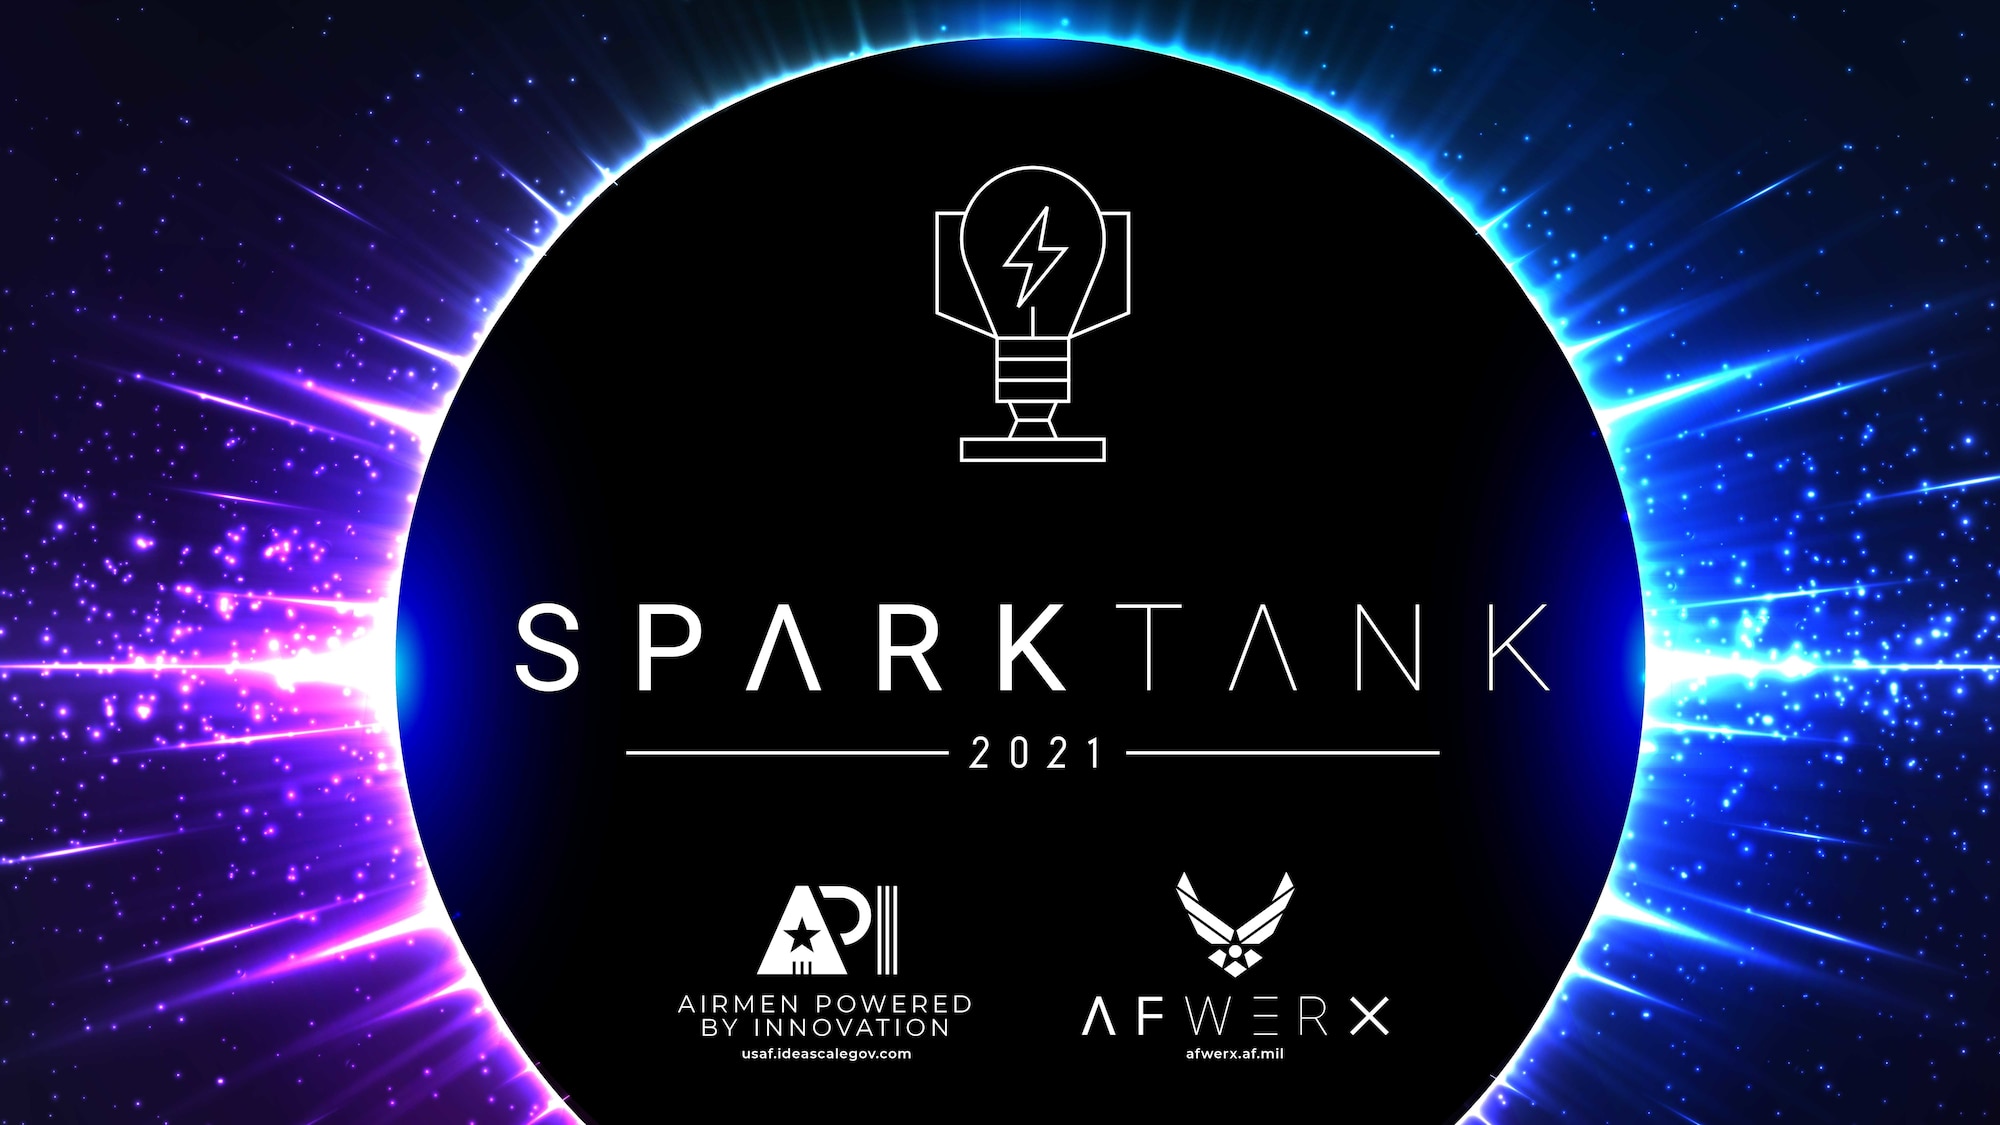 Spark Tank is now accepting submissions for the 2021 campaign from July 1 to October 16, 2020. The annual campaign is designed to spur and empower innovative ideas from Airmen to further strengthen Air Force culture and capabilities. (AFWERX Courtesy Graphic)